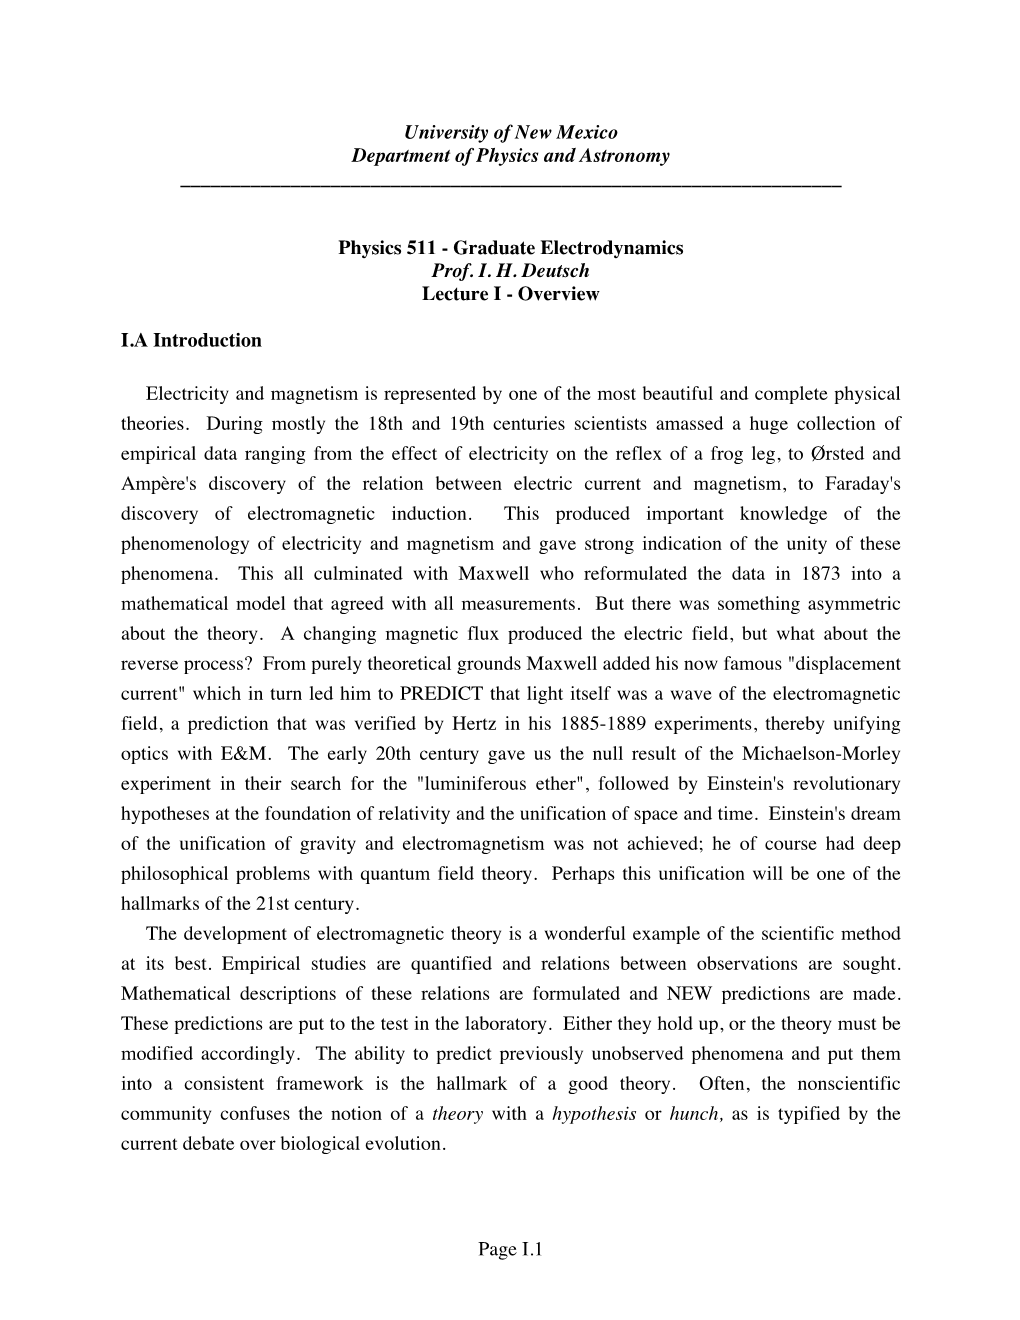 Page I.1 University of New Mexico Department of Physics And